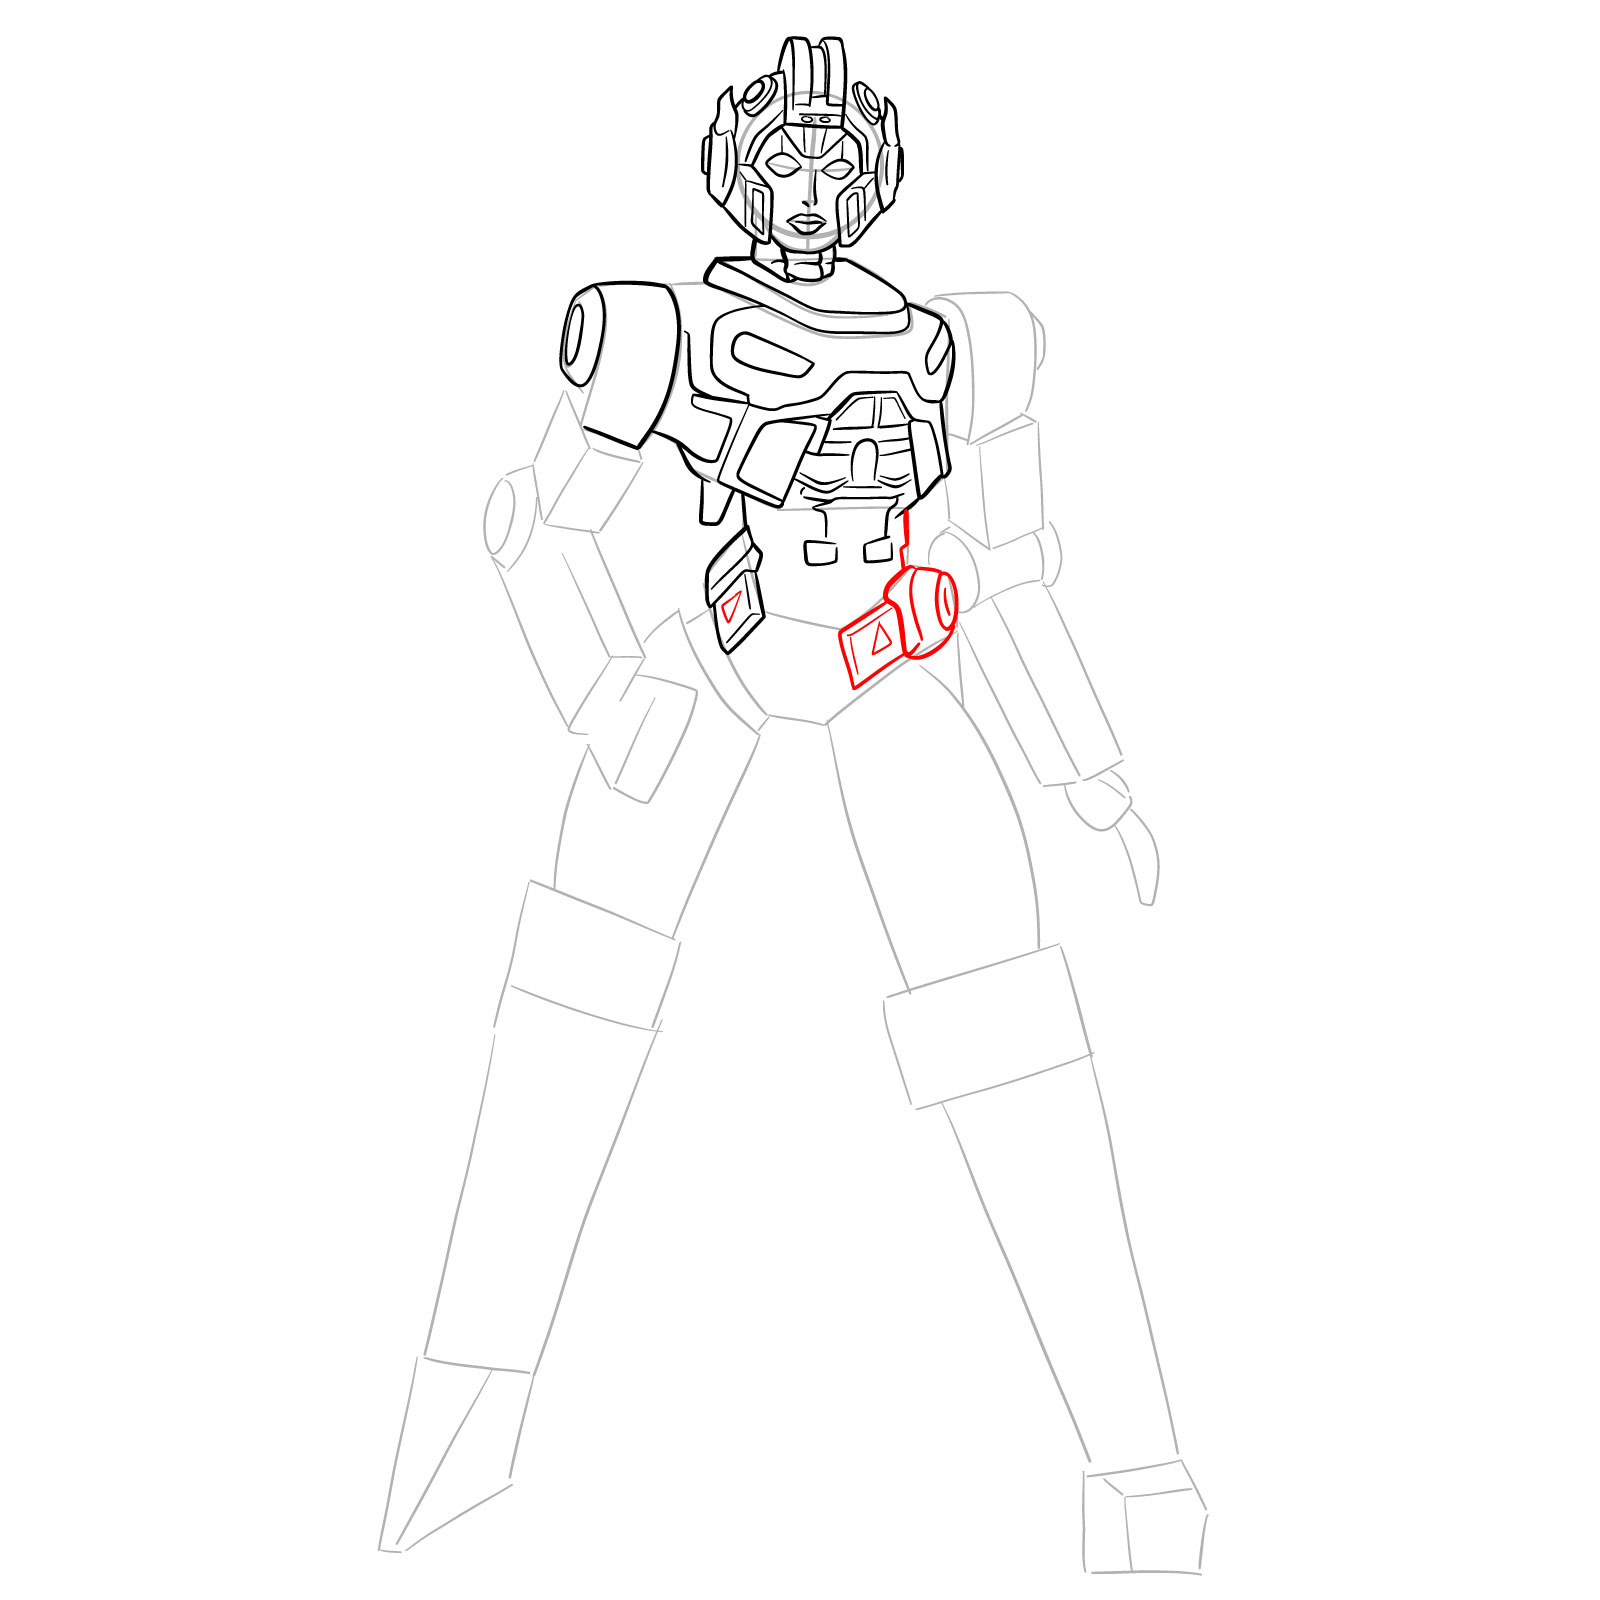 How to draw Arcee from Transformers Prime - step 20